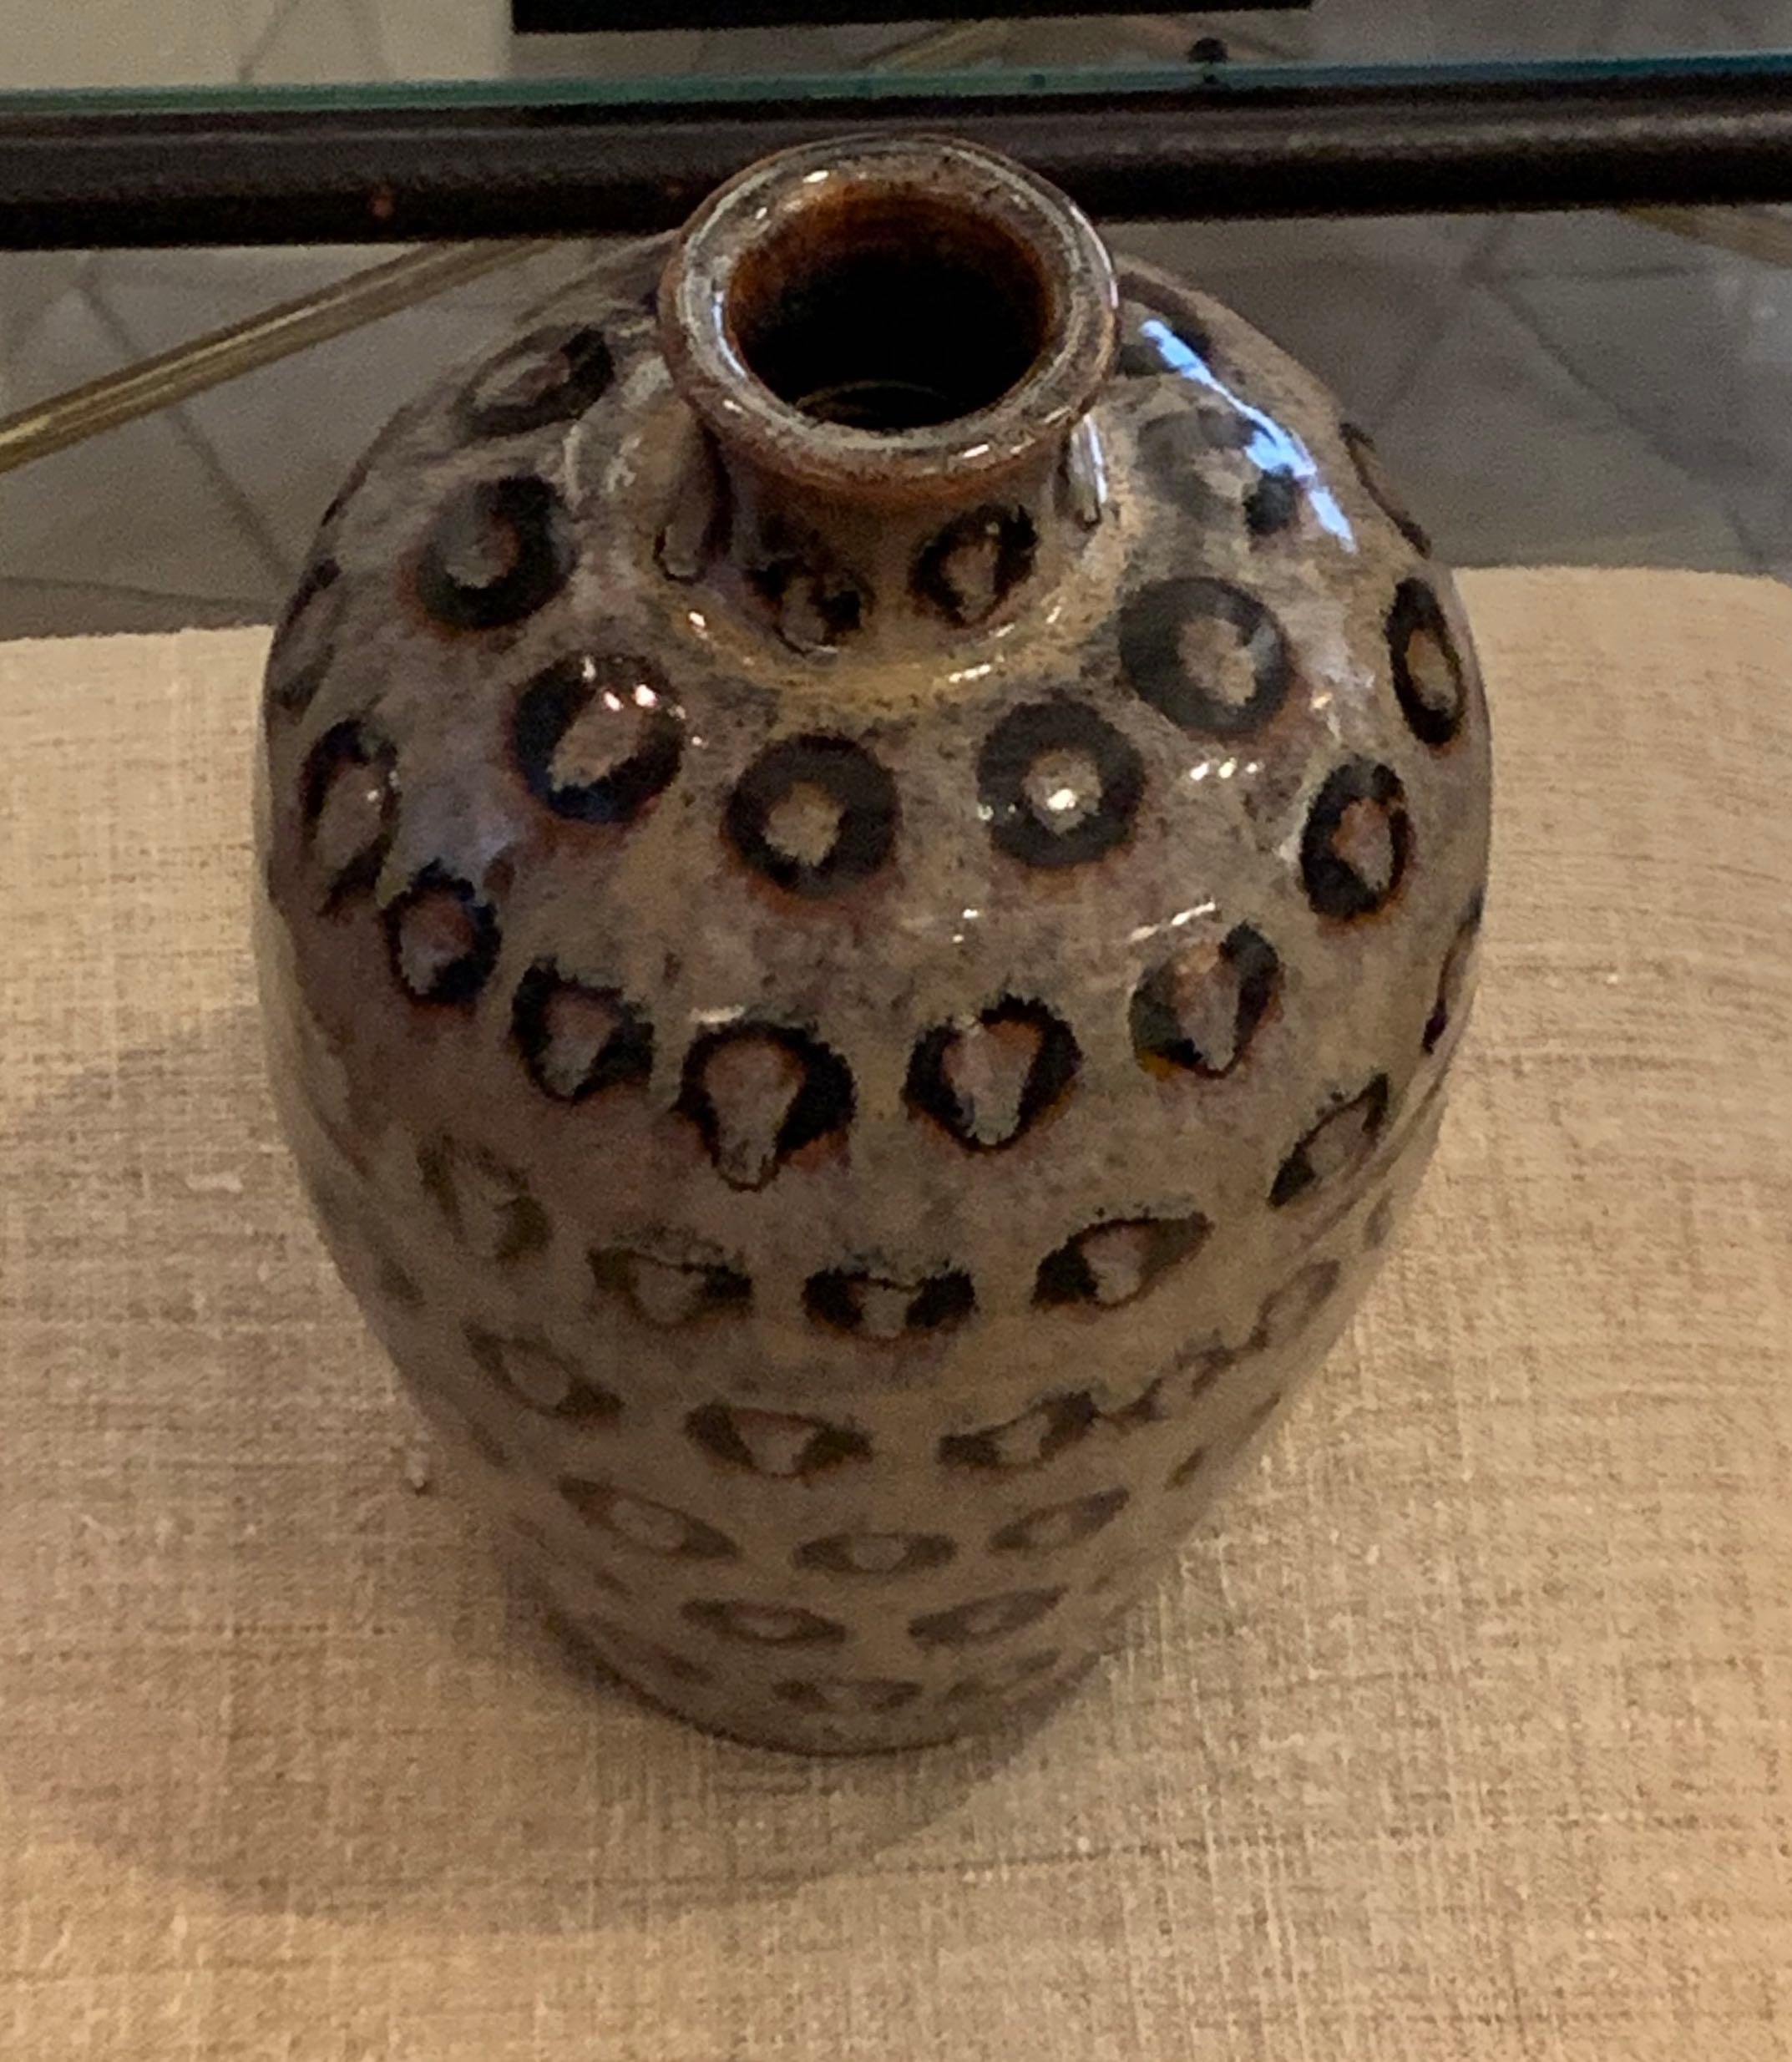 Contemporary Chinese heather taupe vase with hand painted black circle design.
Sits nicely with a collection of circle design hand painted vases.
S5667, S5669